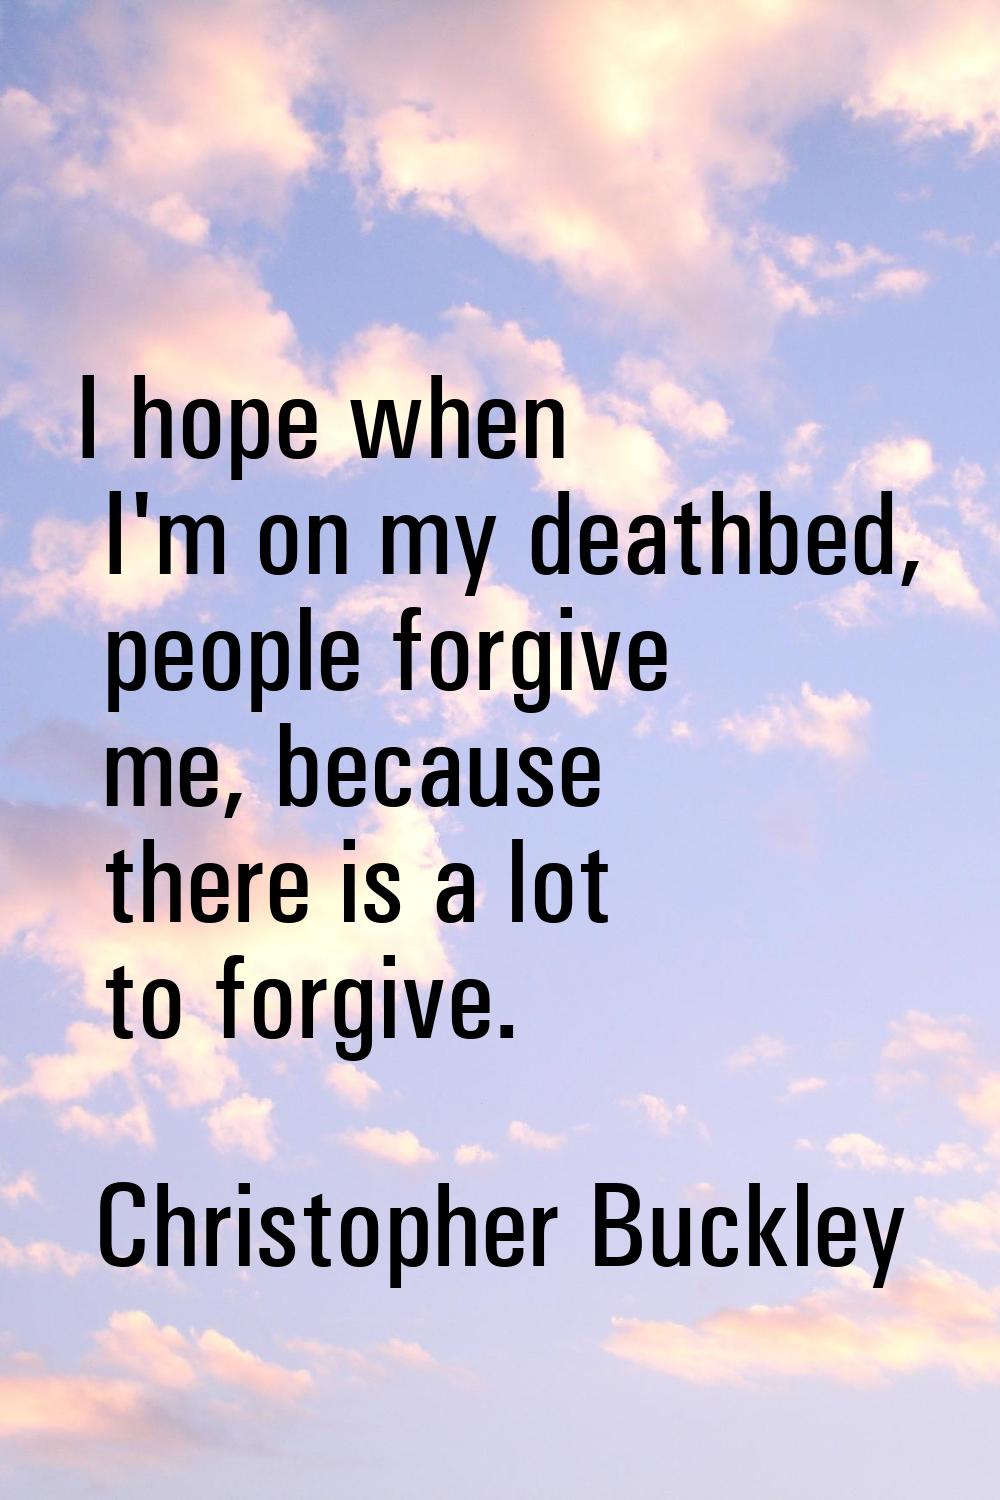 I hope when I'm on my deathbed, people forgive me, because there is a lot to forgive.